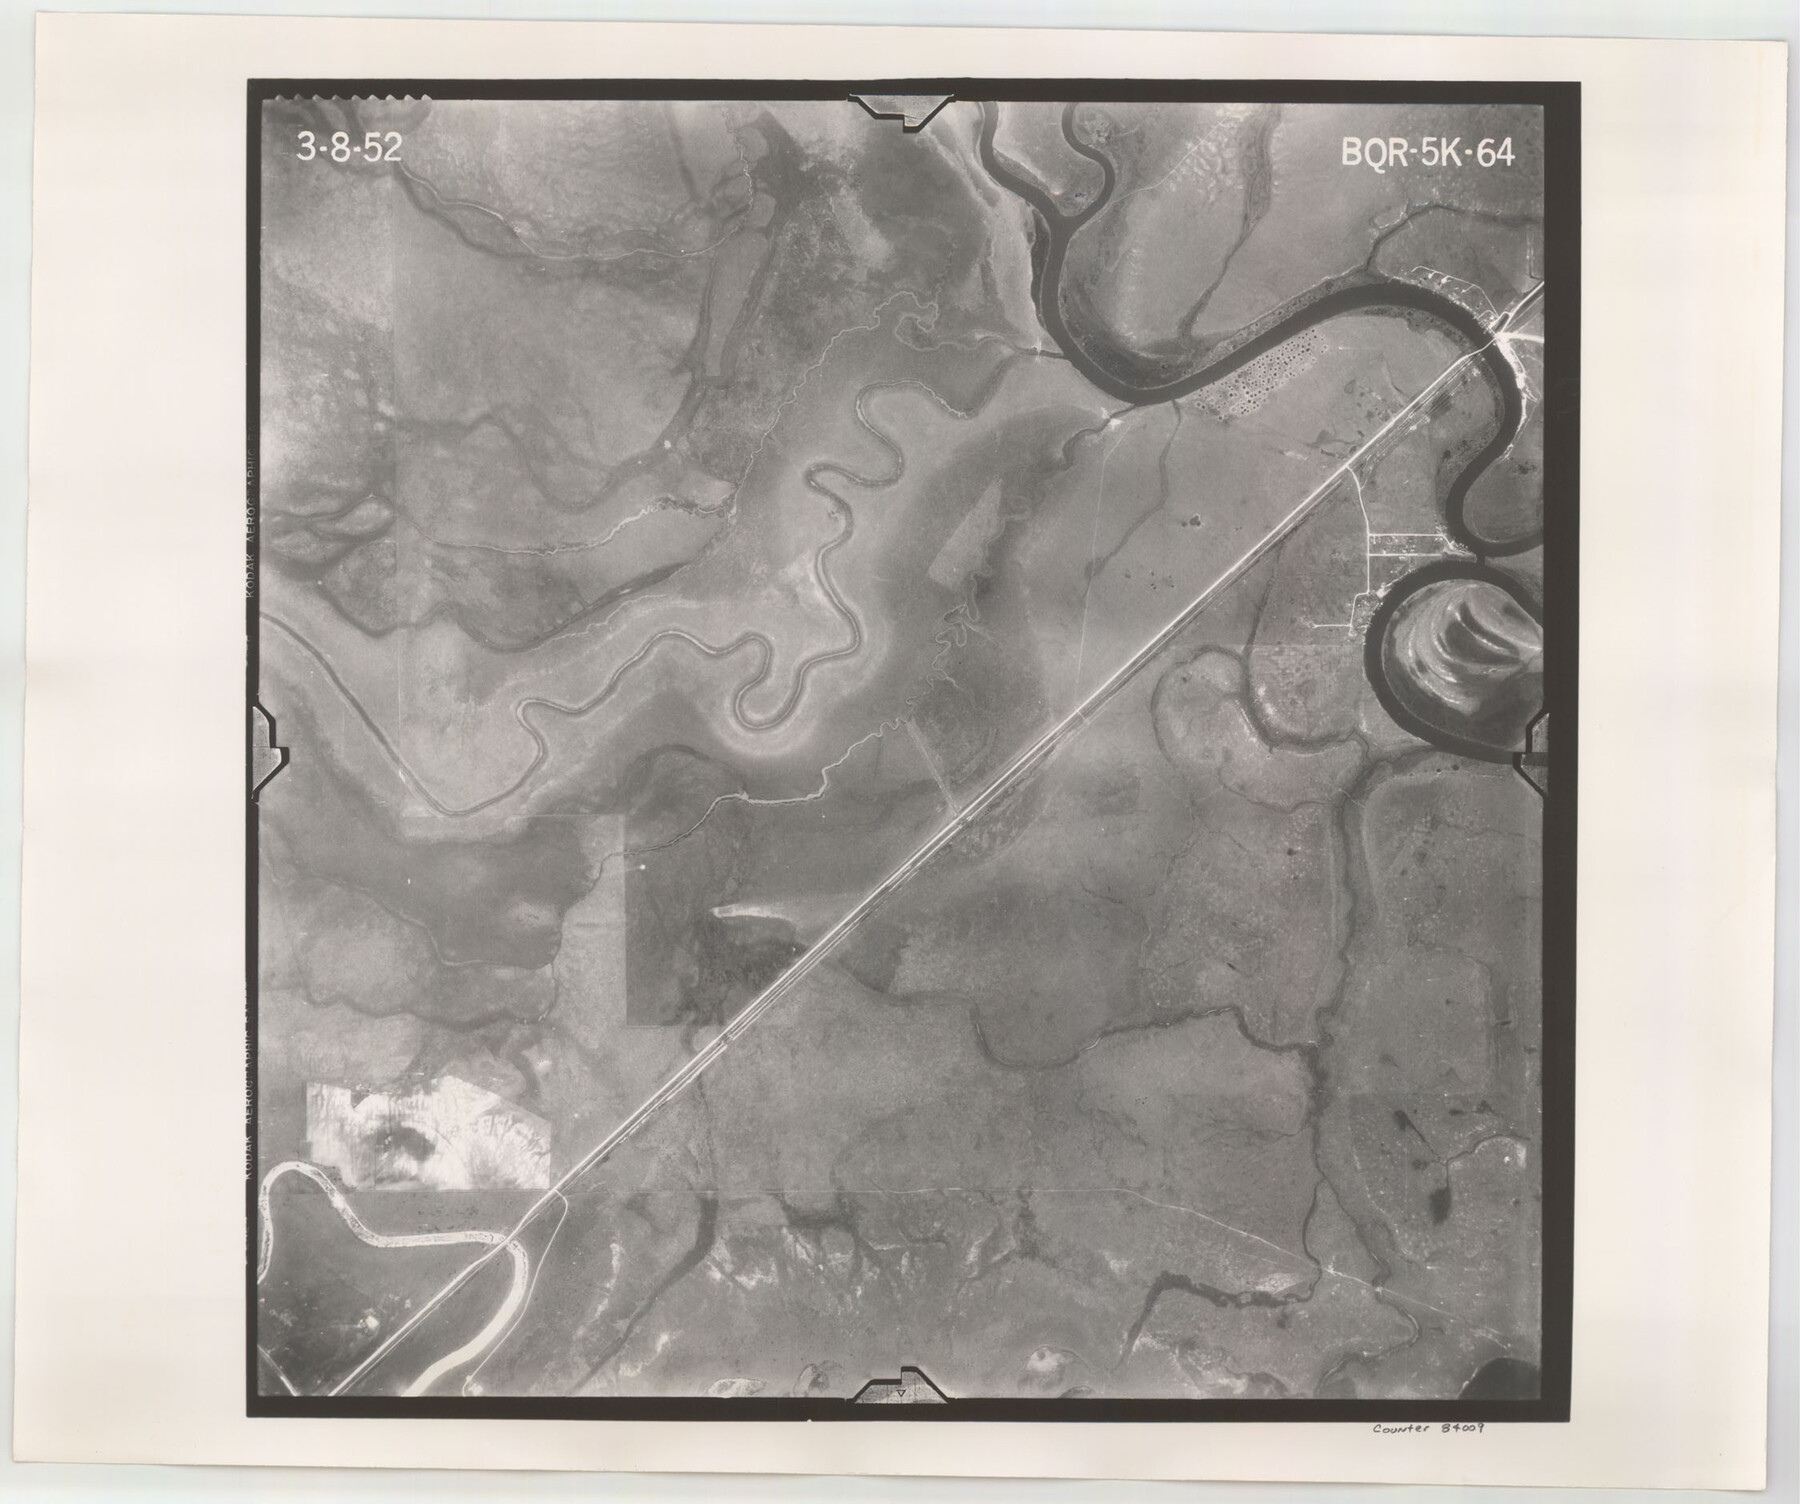 84009, Flight Mission No. BQR-5K, Frame 64, Brazoria County, General Map Collection